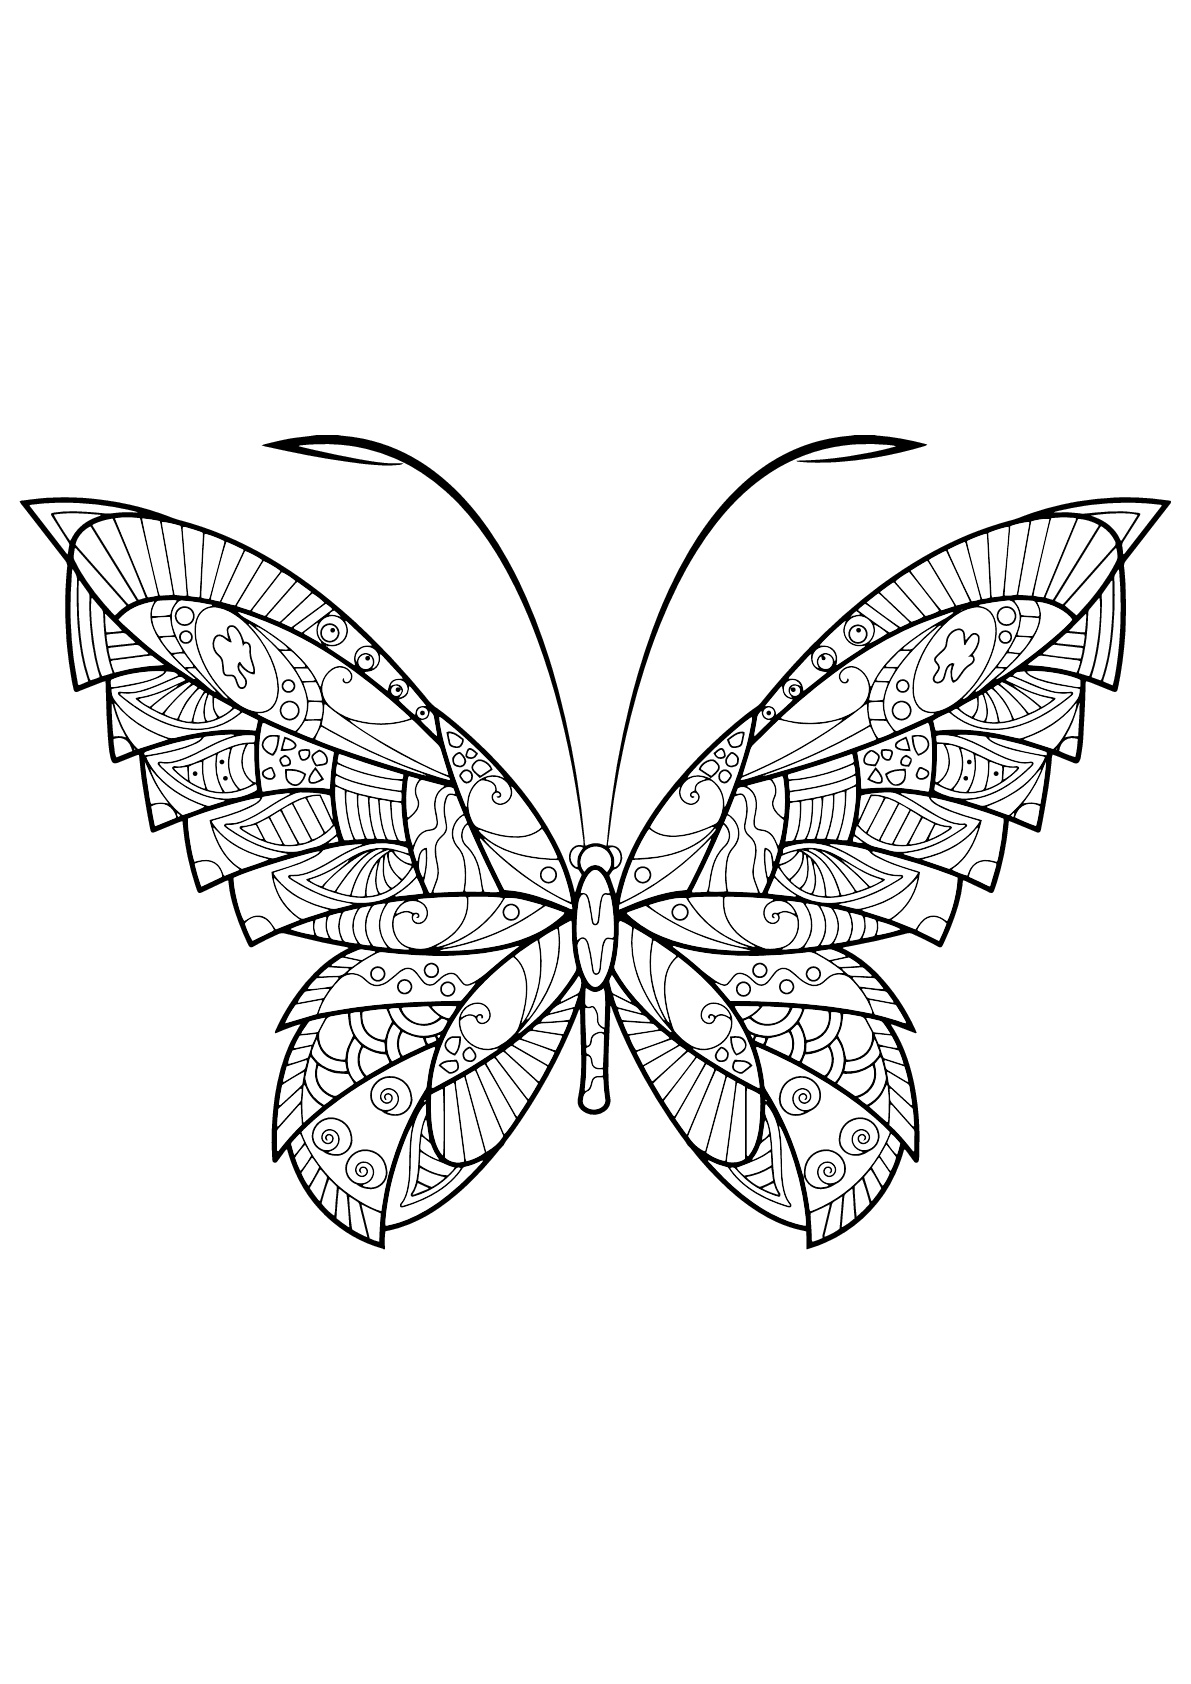 Butterflies to print for free - Butterflies Kids Coloring ...